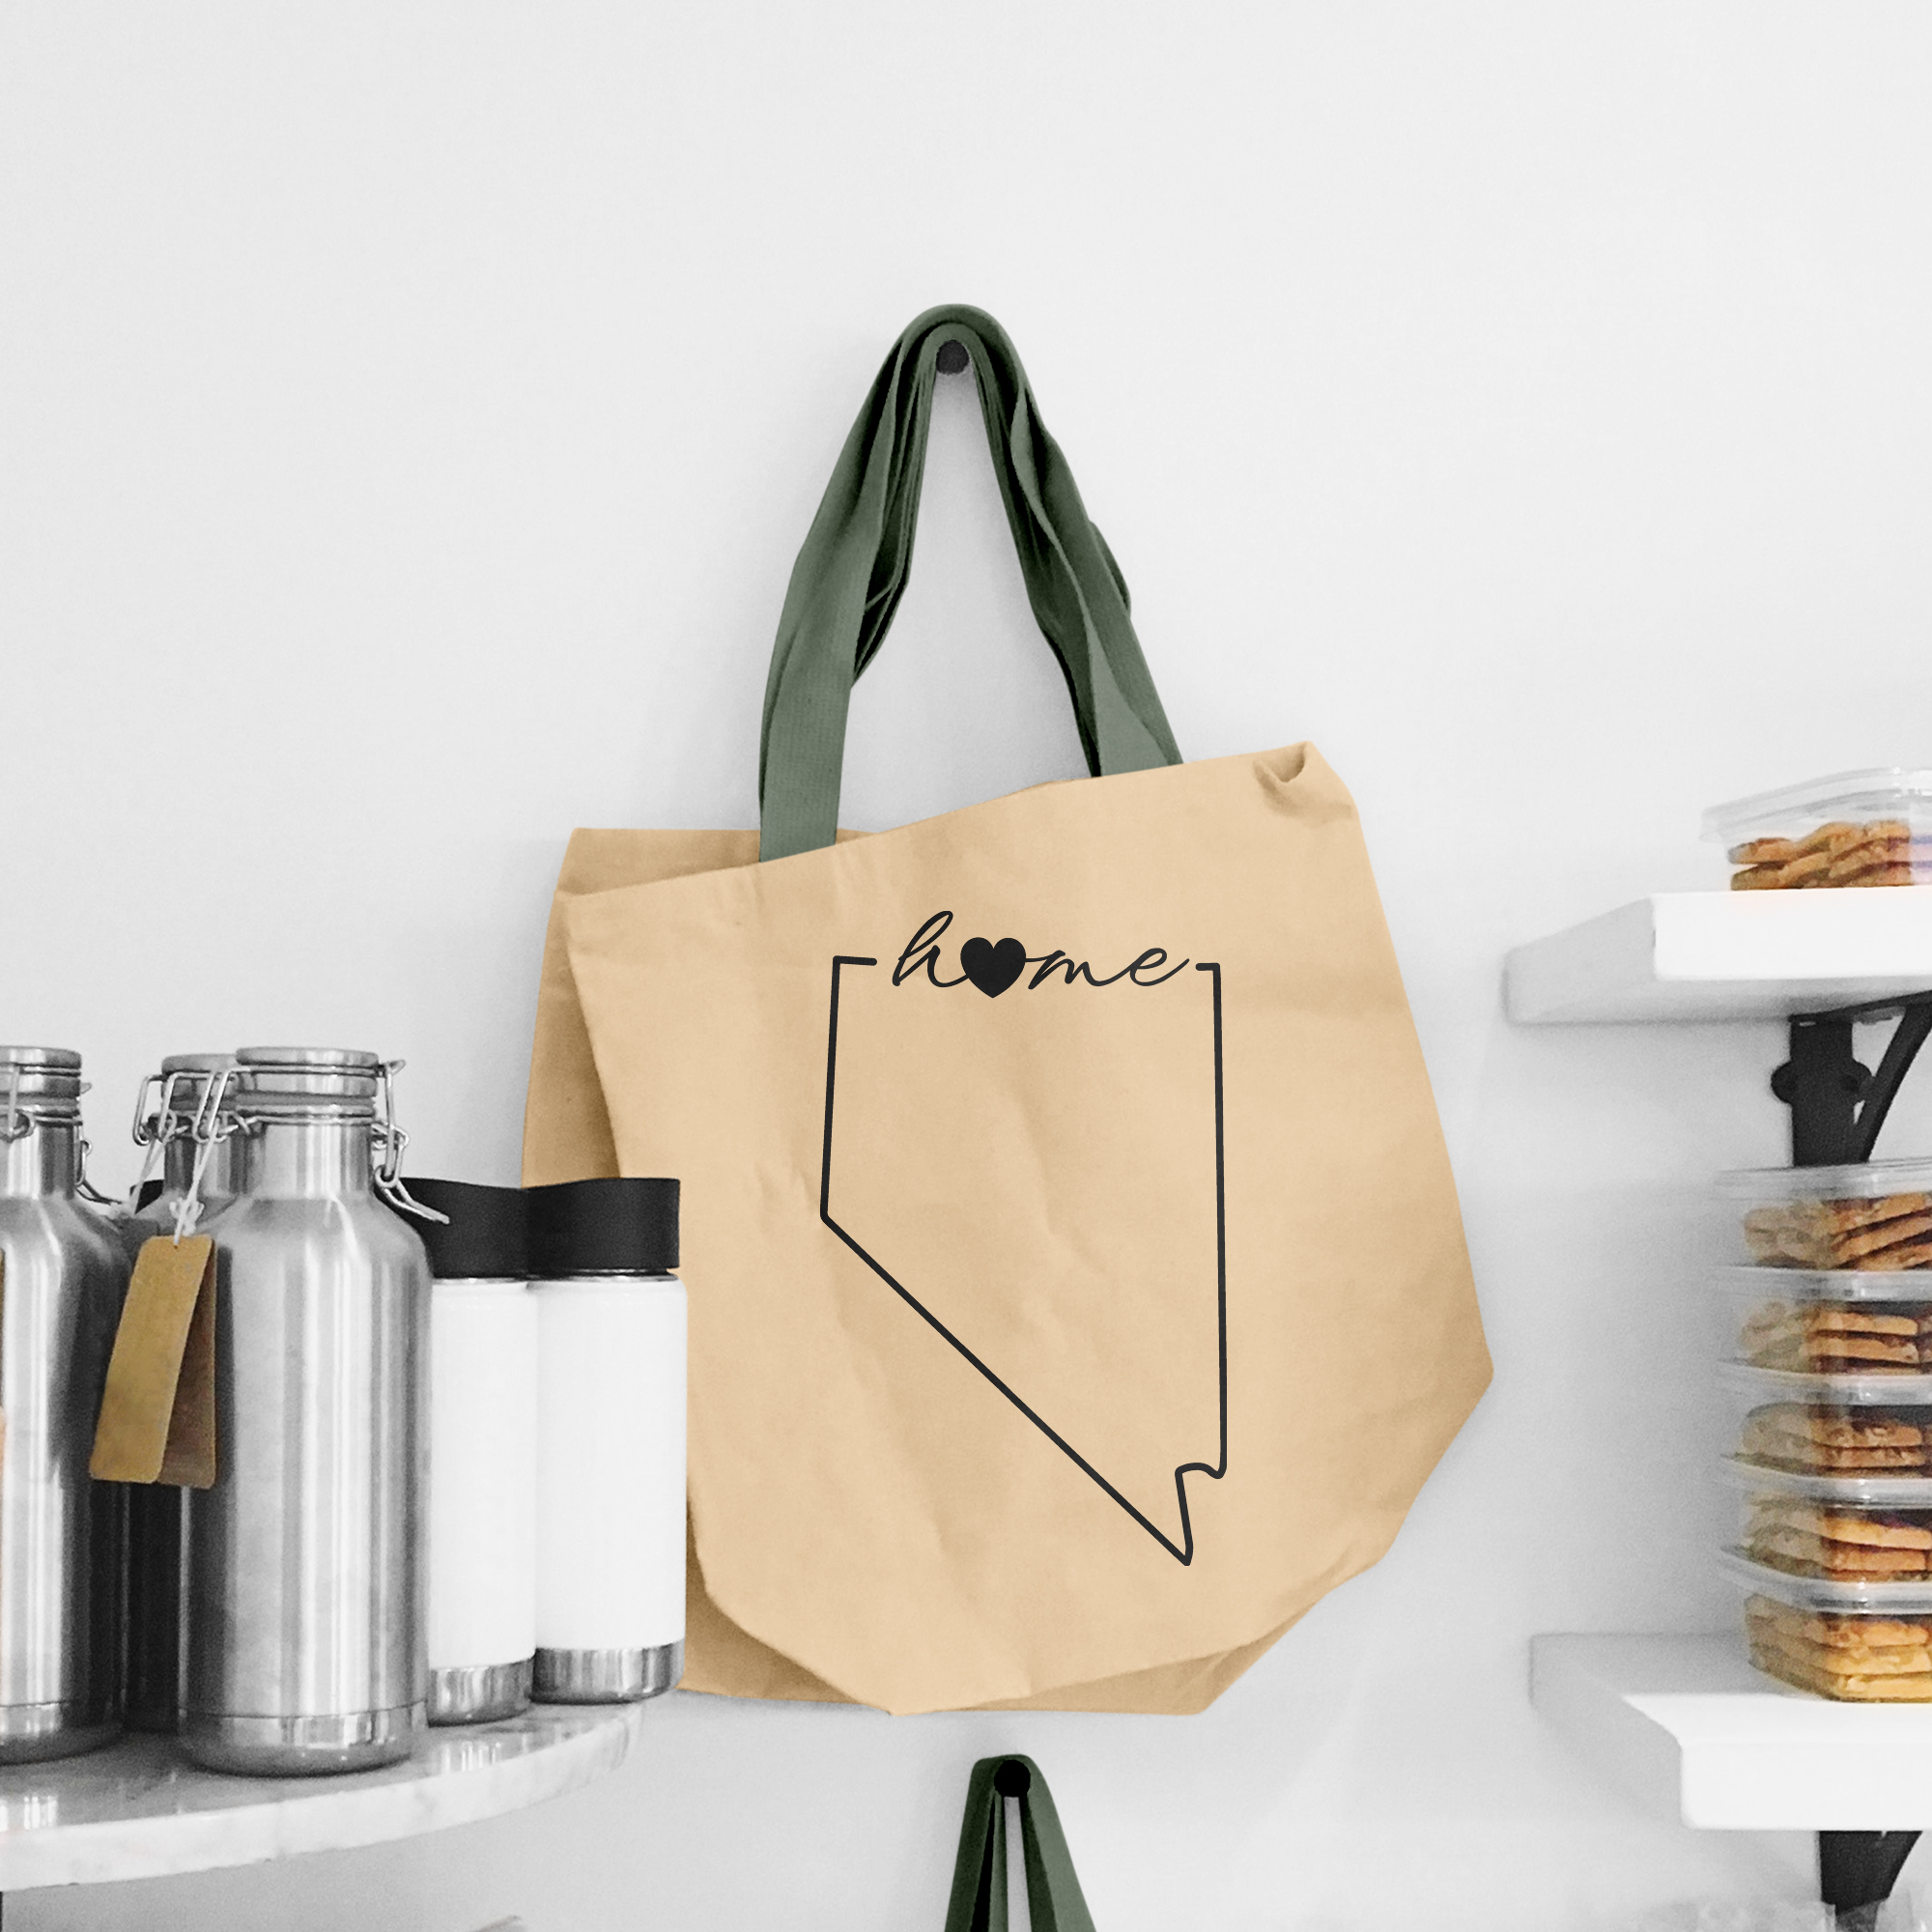 Black illustration of map of Nevada on the beige shopping bag with dirty green handle.